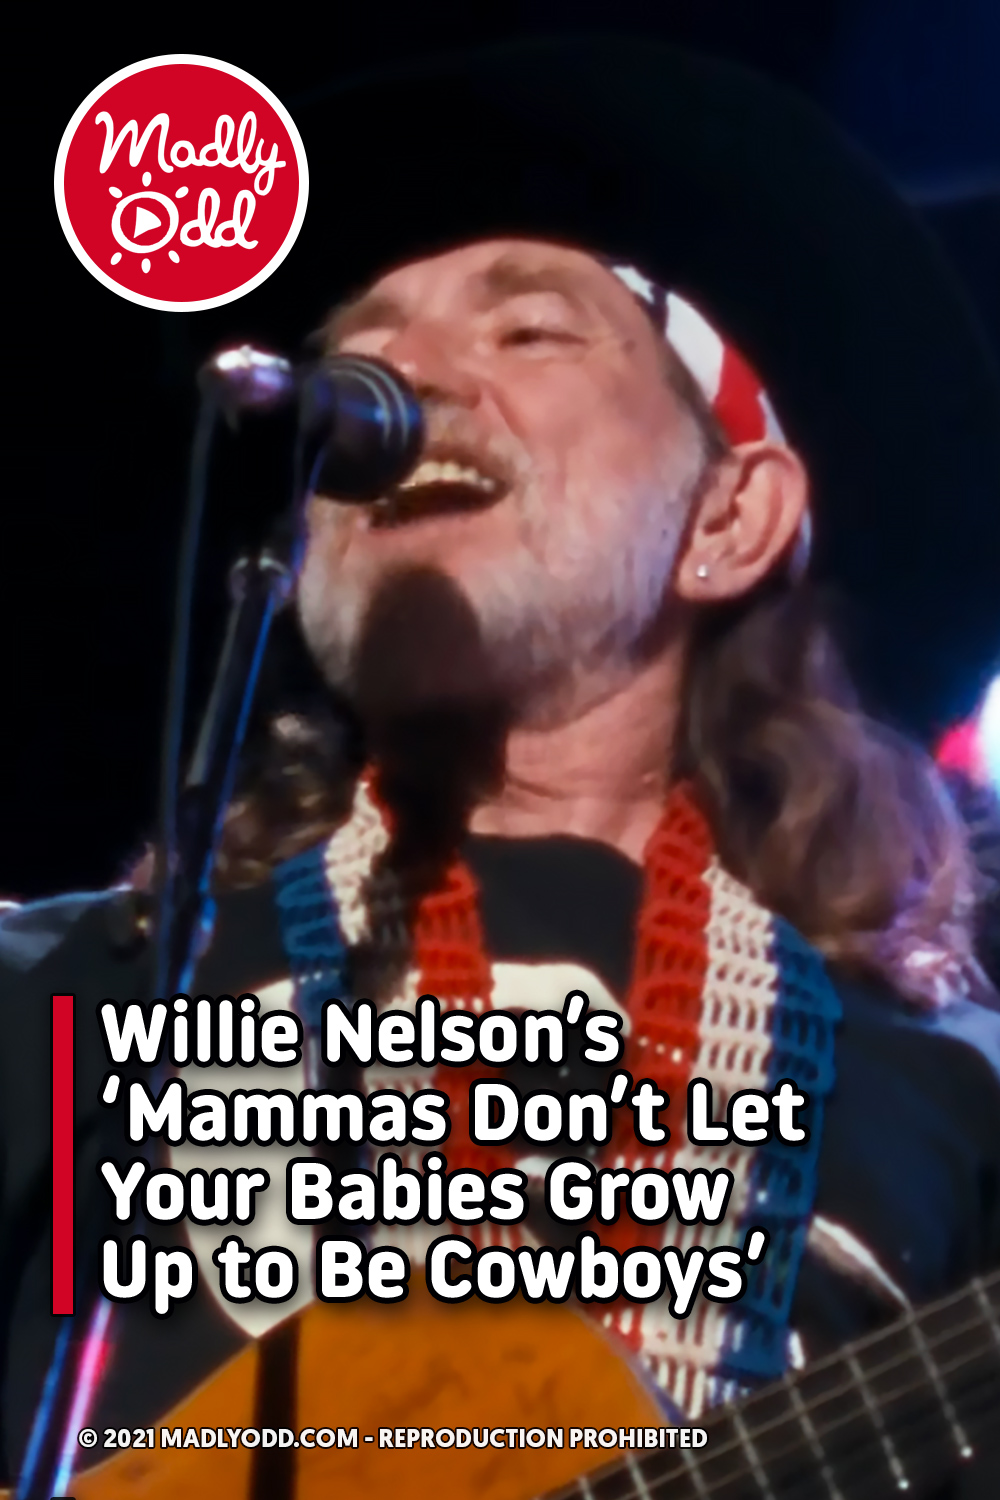 Willie Nelson’s ‘Mammas Don’t Let Your Babies Grow Up to Be Cowboys’